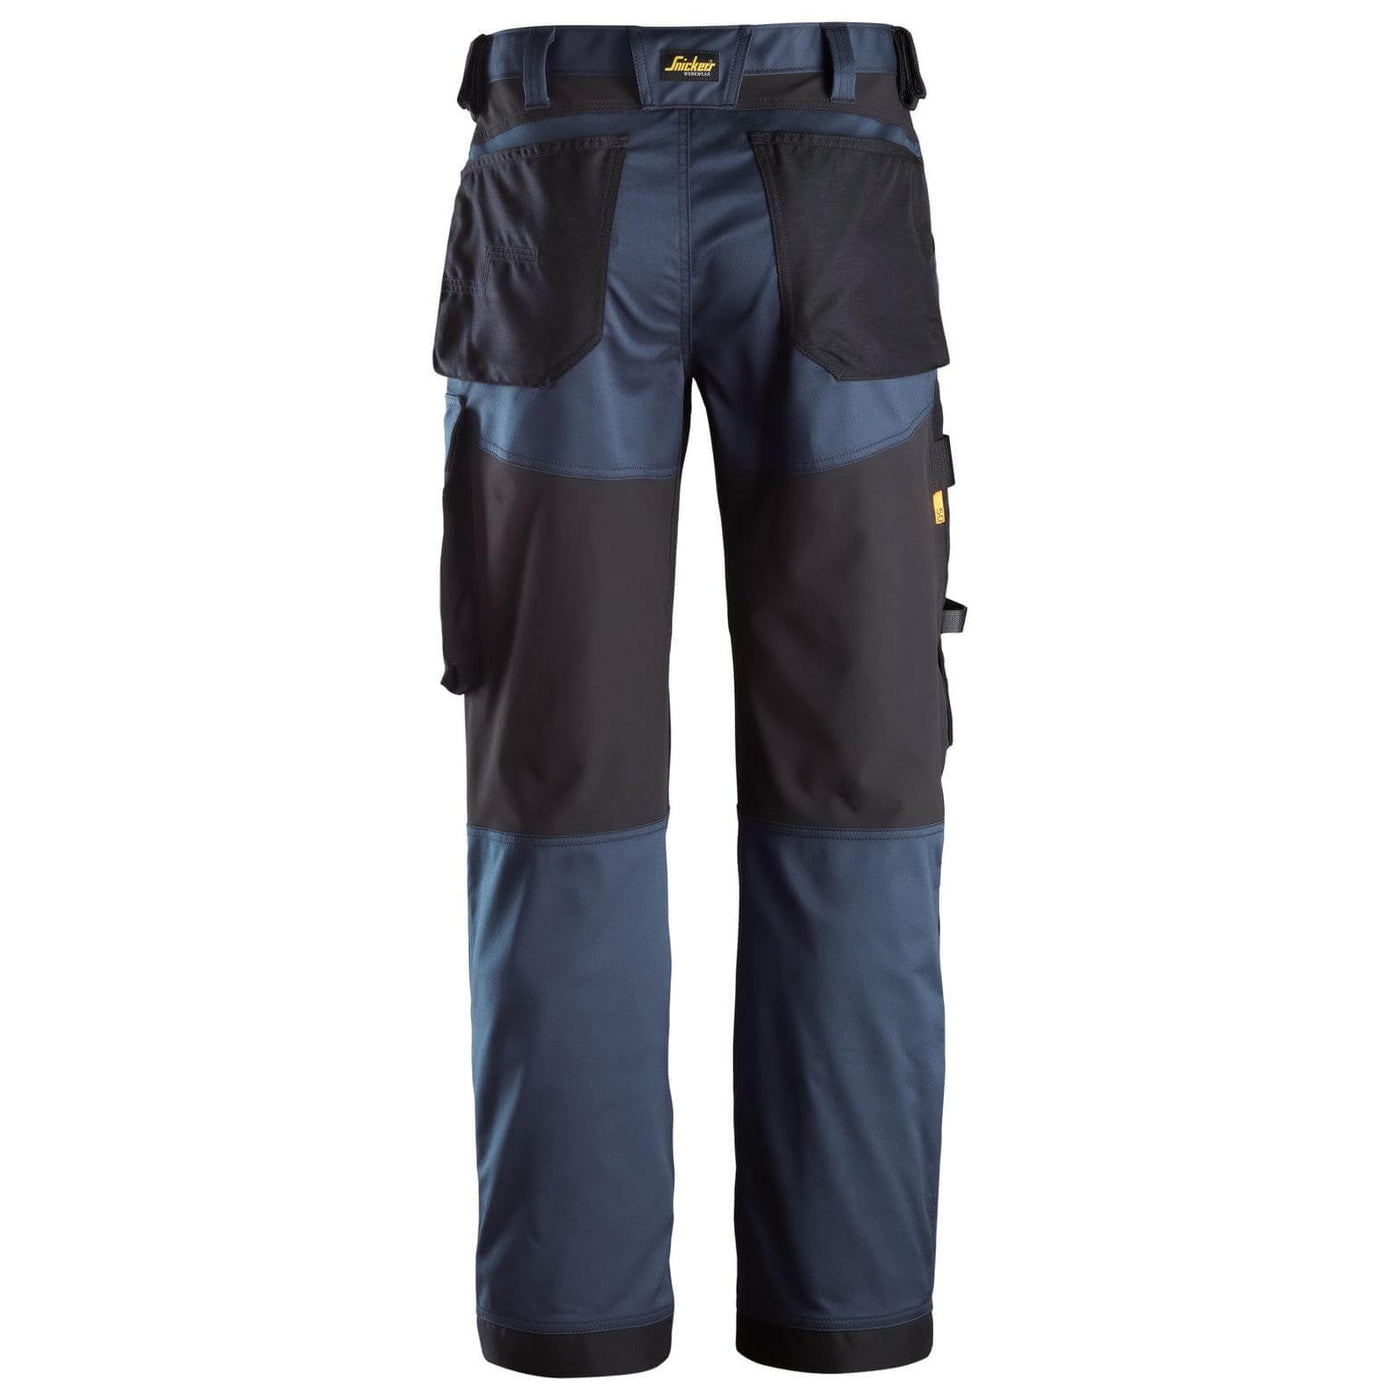 Snickers 6351 AllroundWork Stretch Loose Fit Work Trousers Navy Black back #colour_navy-black